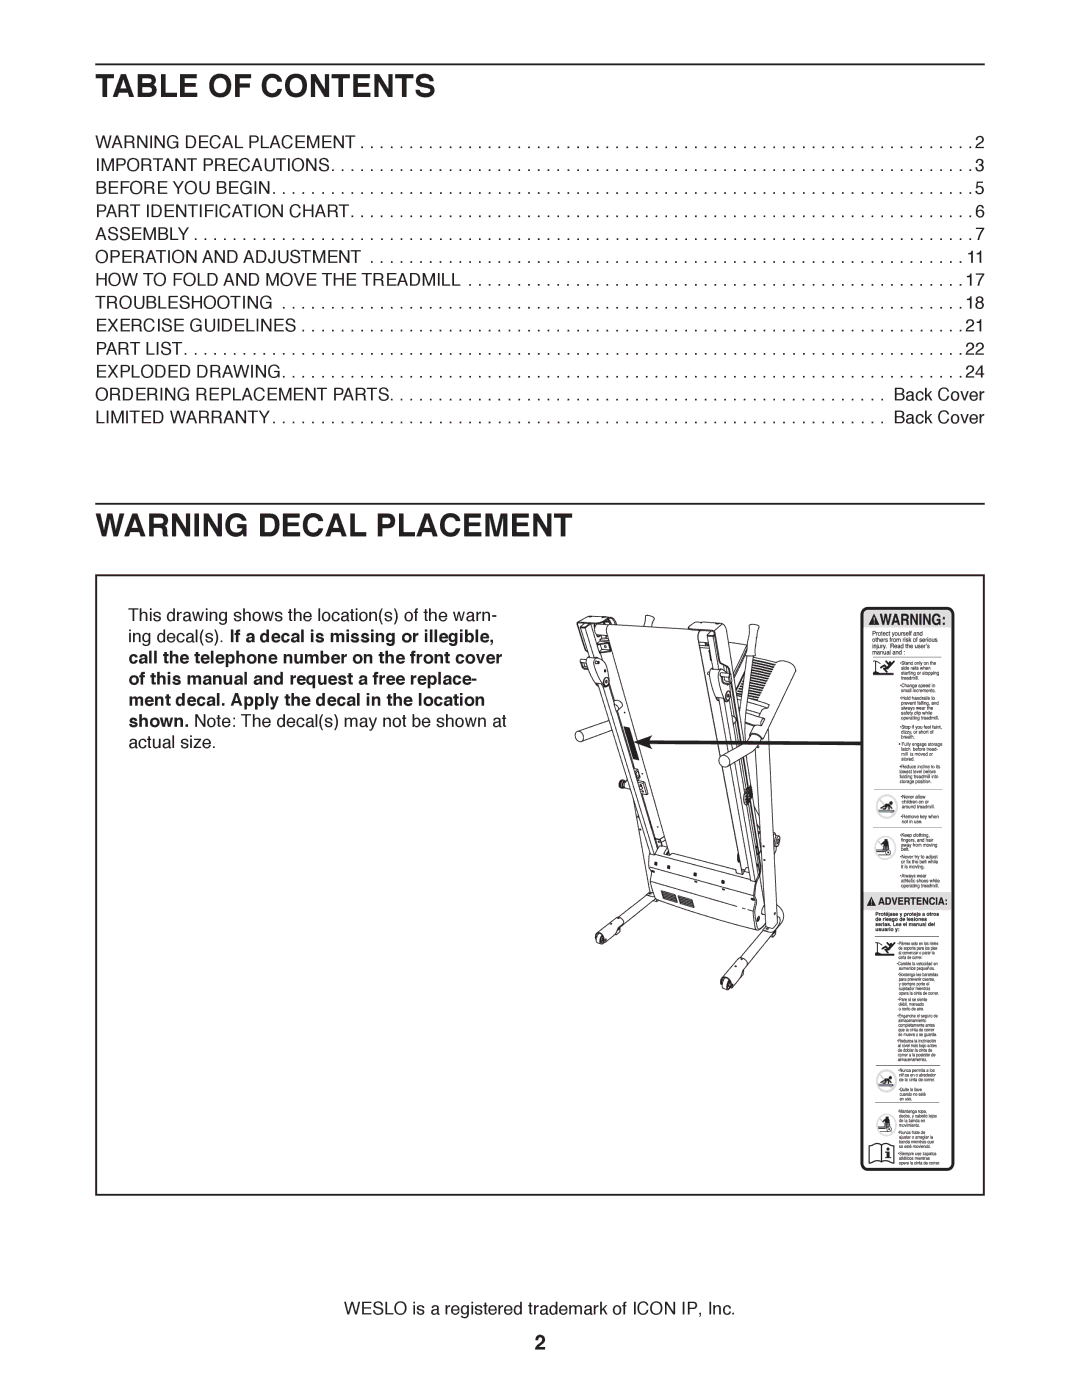 Weslo WLTL31312.0 user manual Table of Contents 